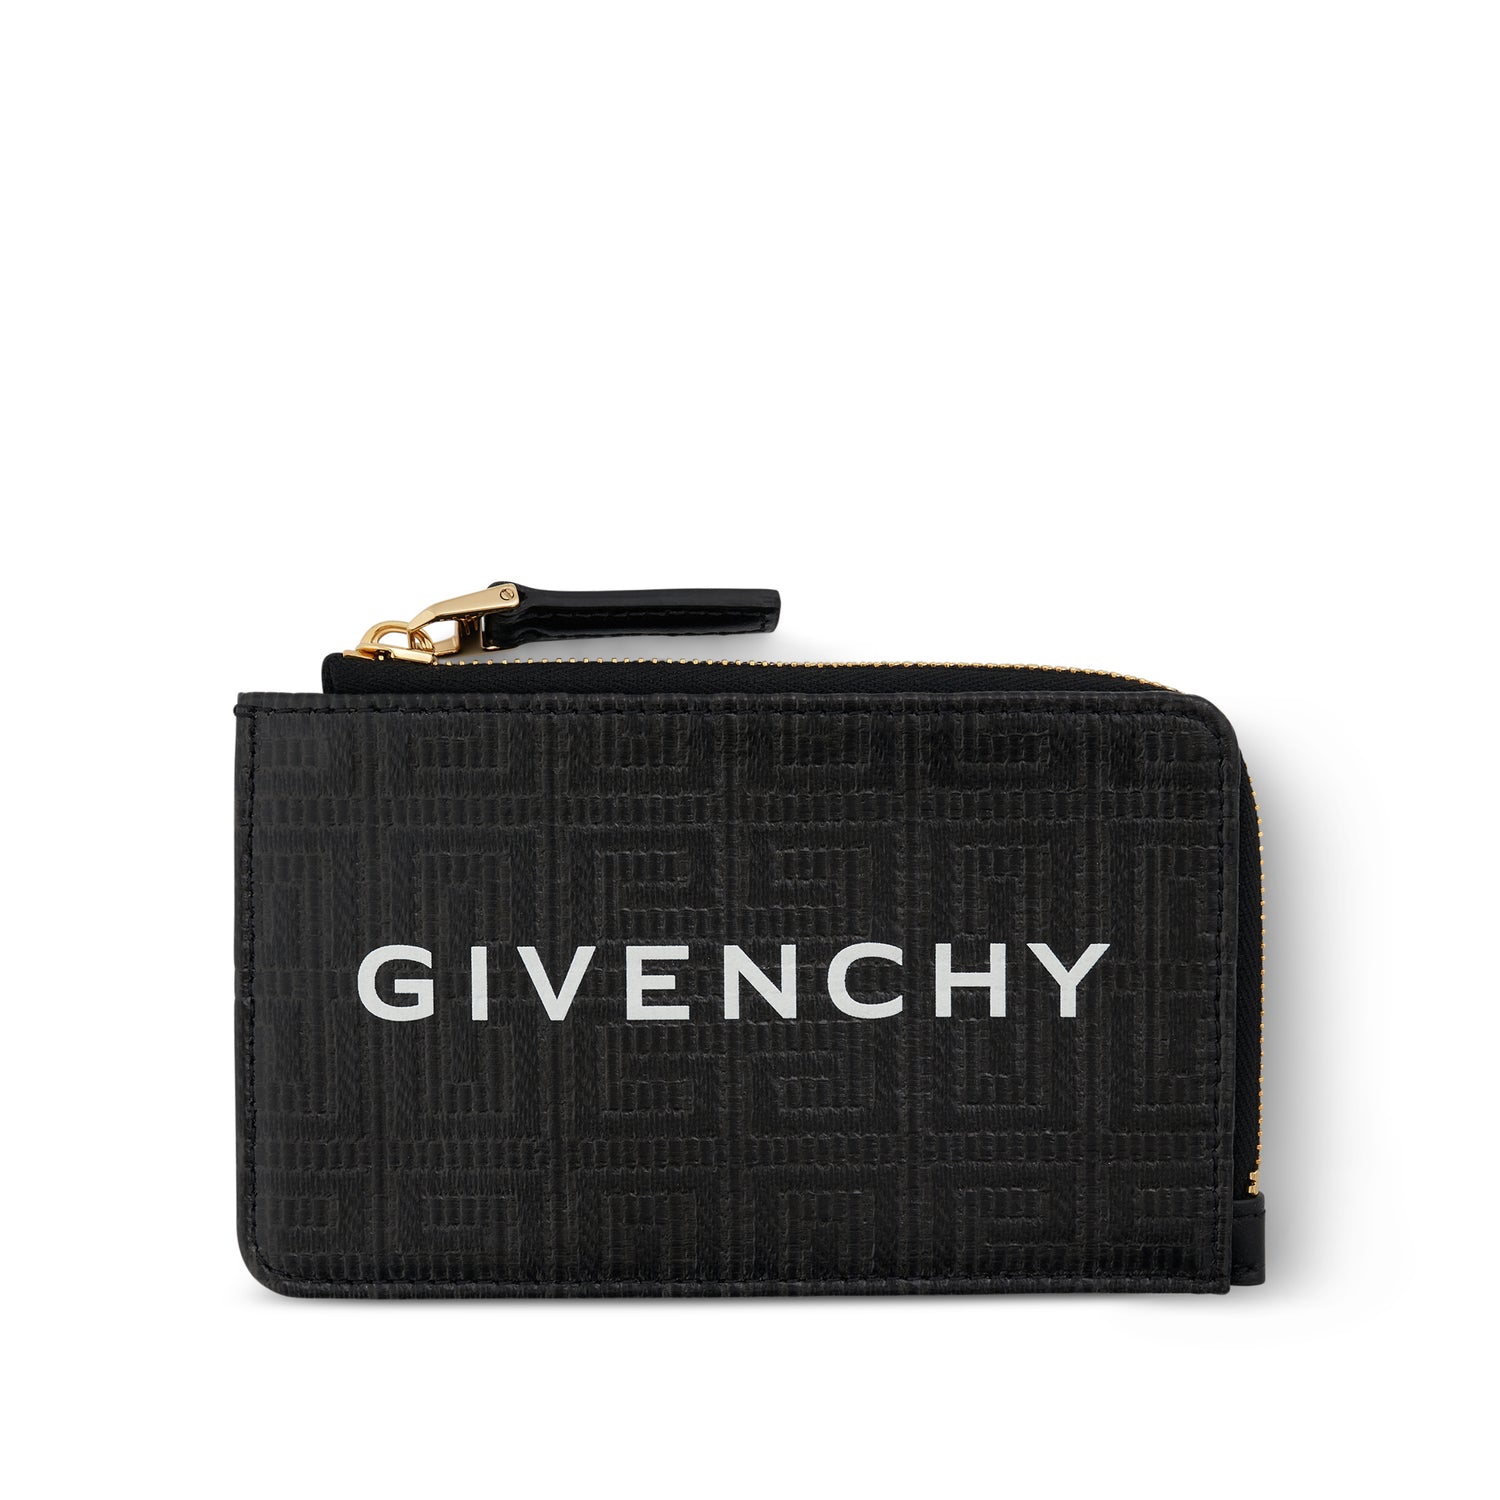 Givenchy Sale - Women Accessories